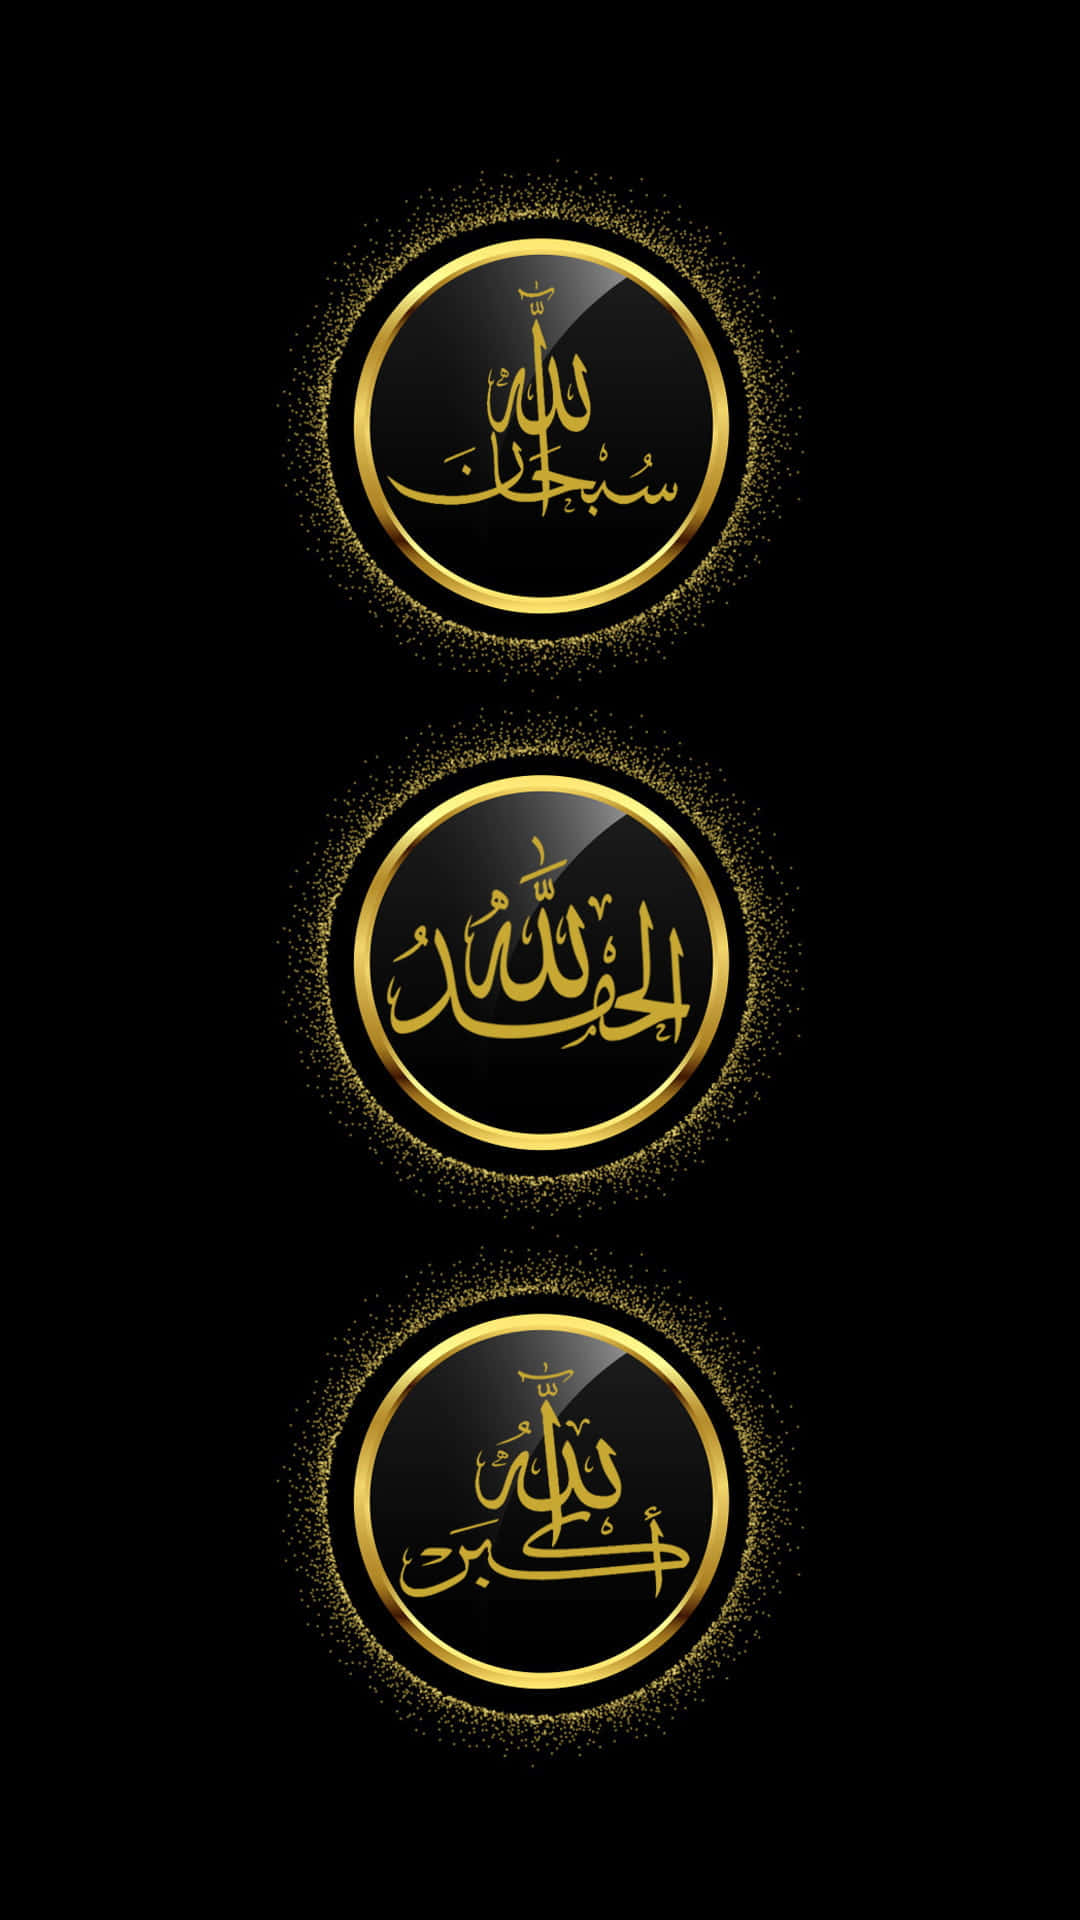 Three Gold Arabic Calligraphy Icons On A Black Background